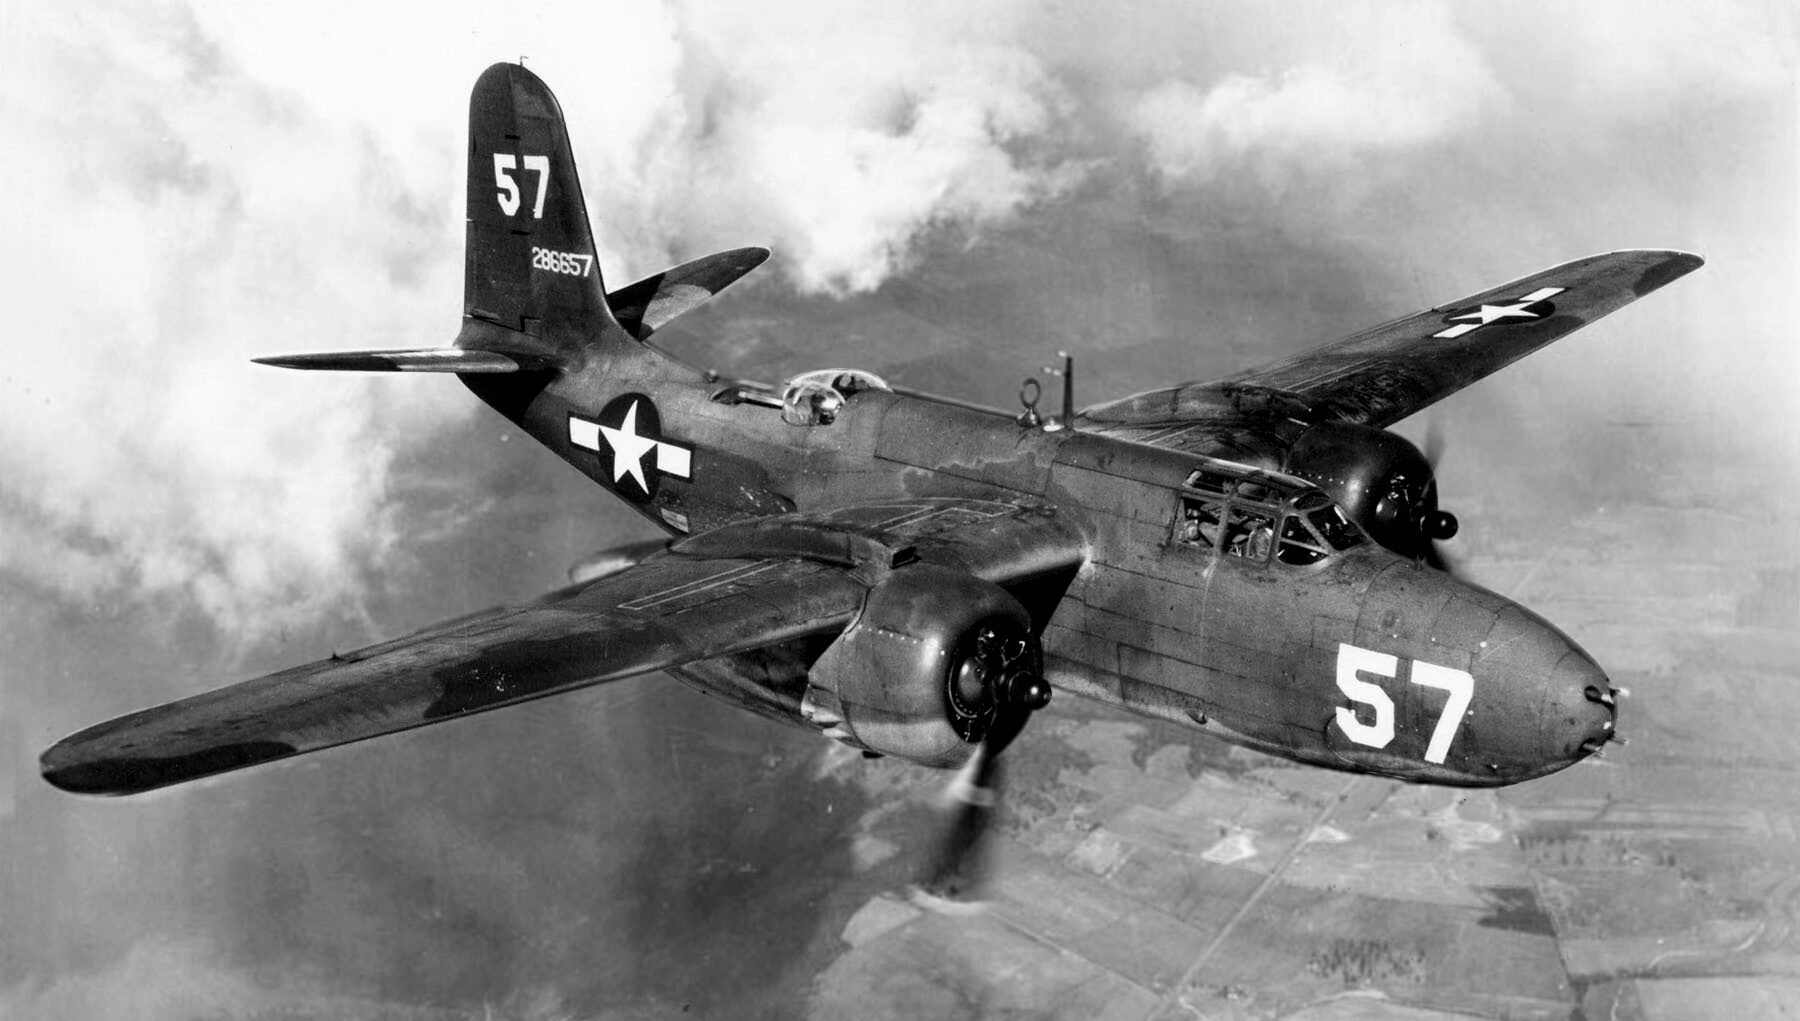 This Douglas A-20G variant is shown in flight. The A-20G was produced in greater numbers than any other type of the aircraft, which served in all theaters of World War II. A total of 2,850 A-20G bombers were built.